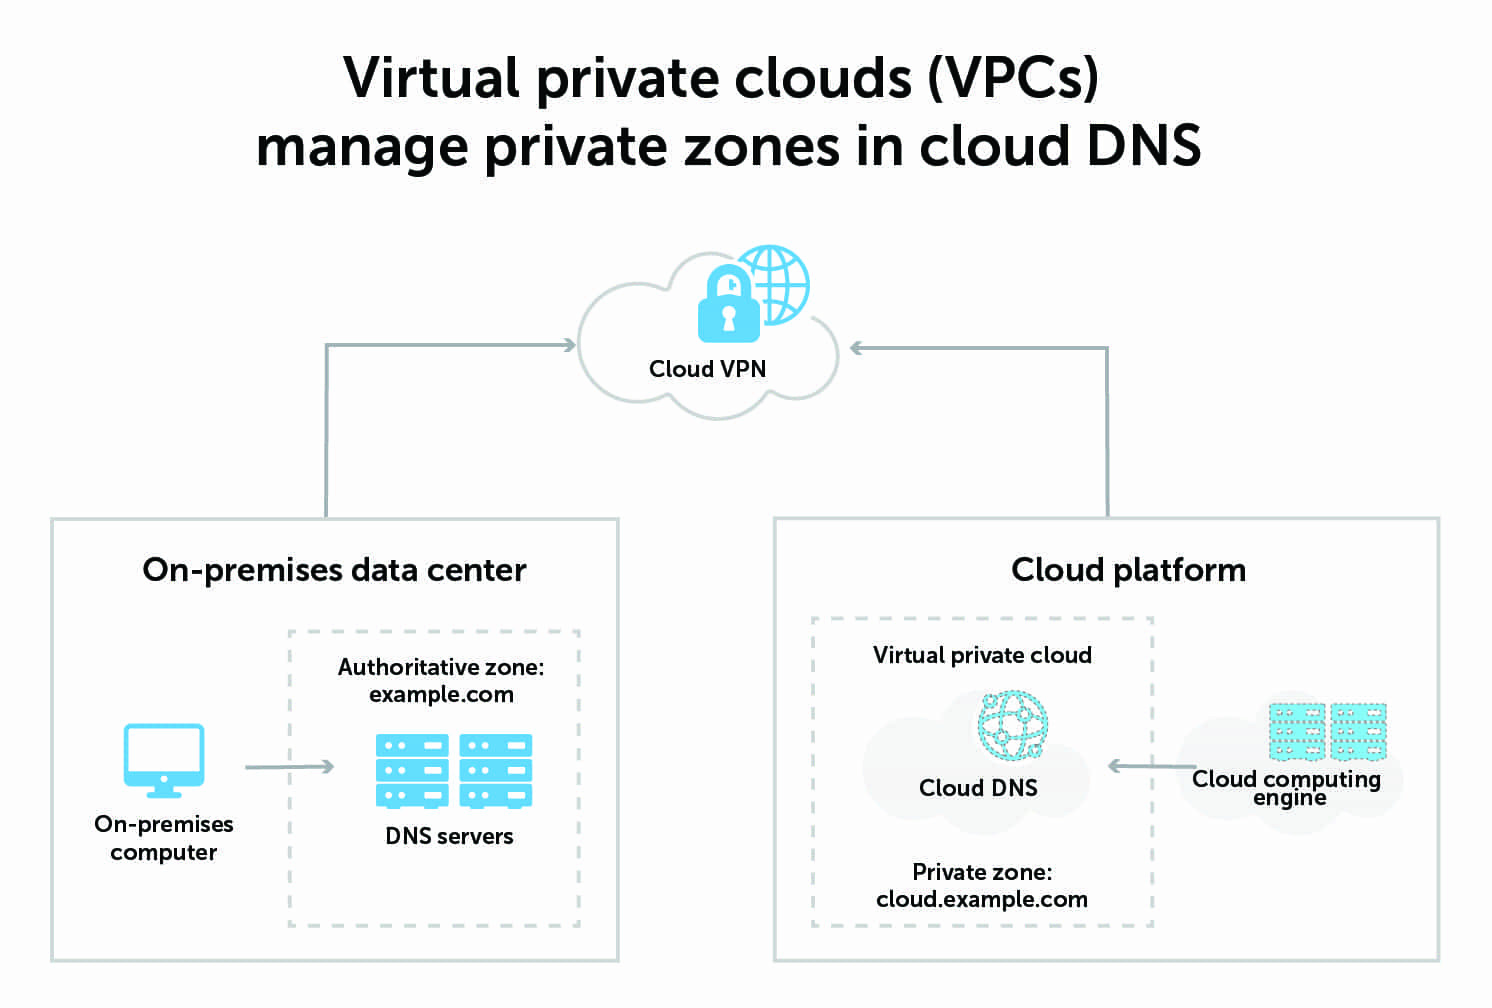 In cloud DNS, virtual private clouds (VPCs) are used to manage private zones